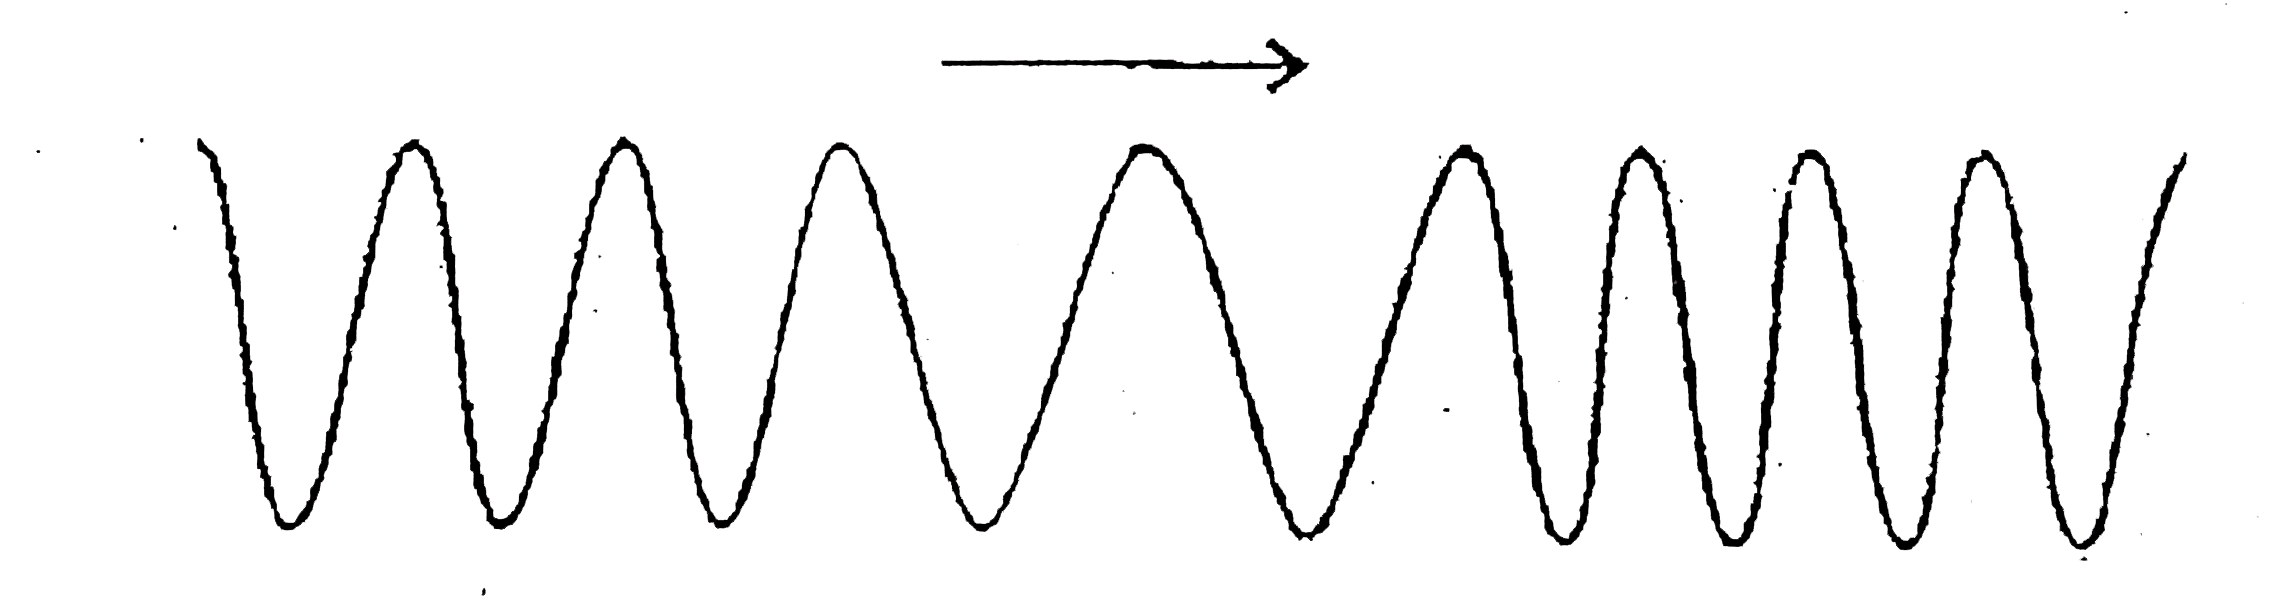 A light wave travels through three transparent materials of equal thickness rank in order from the highest to lowest the indices of refraction n(1),n(2) and n(3).